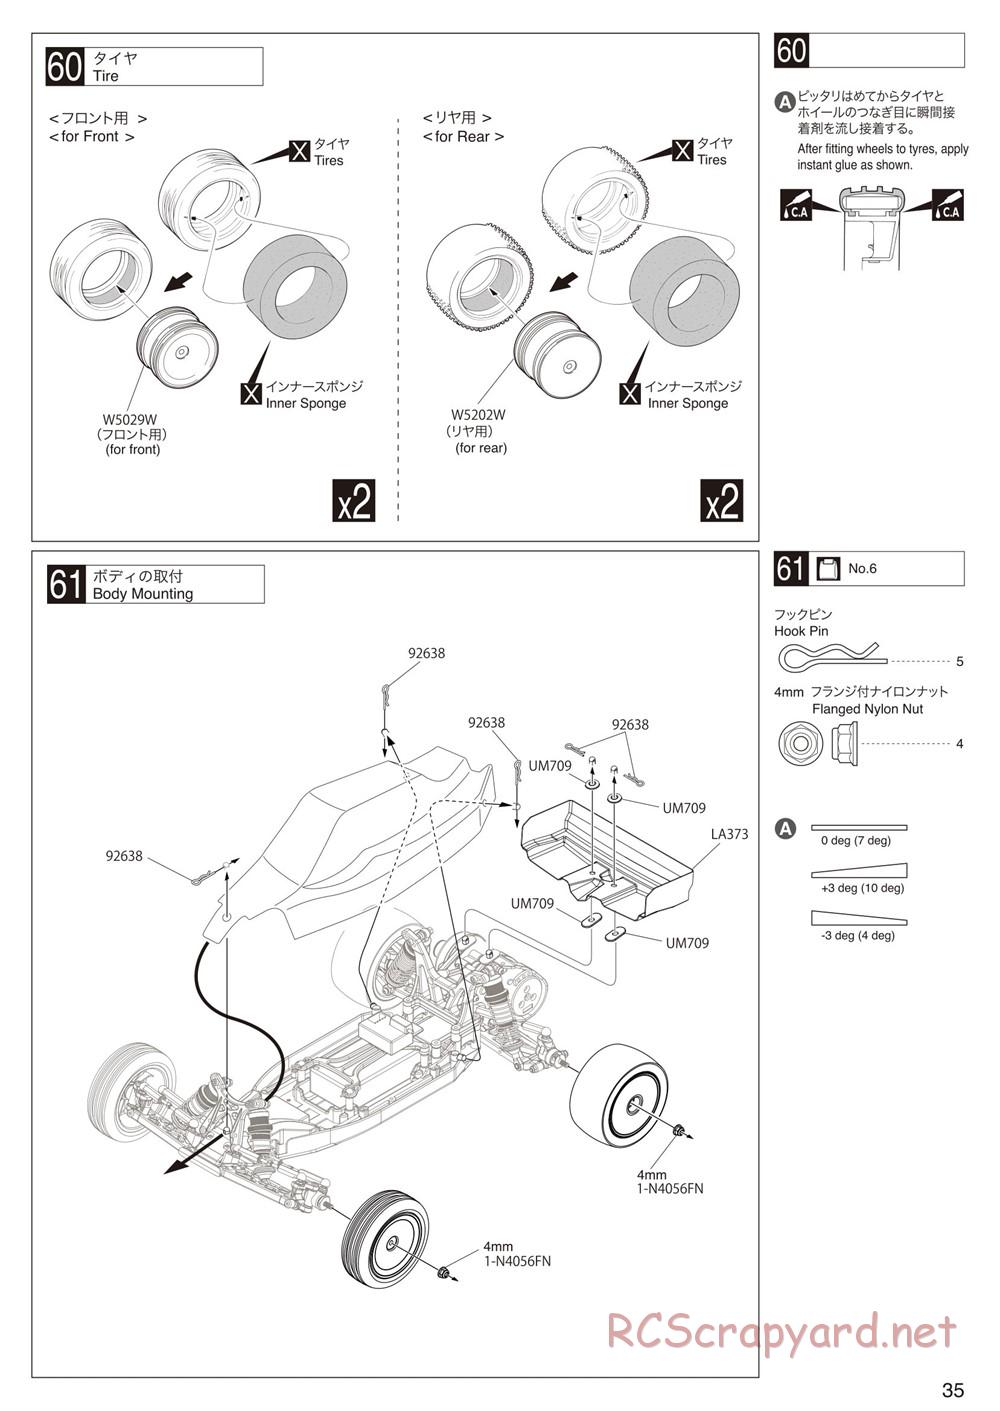 Kyosho - Ultima RB6 (2015) - Manual - Page 35